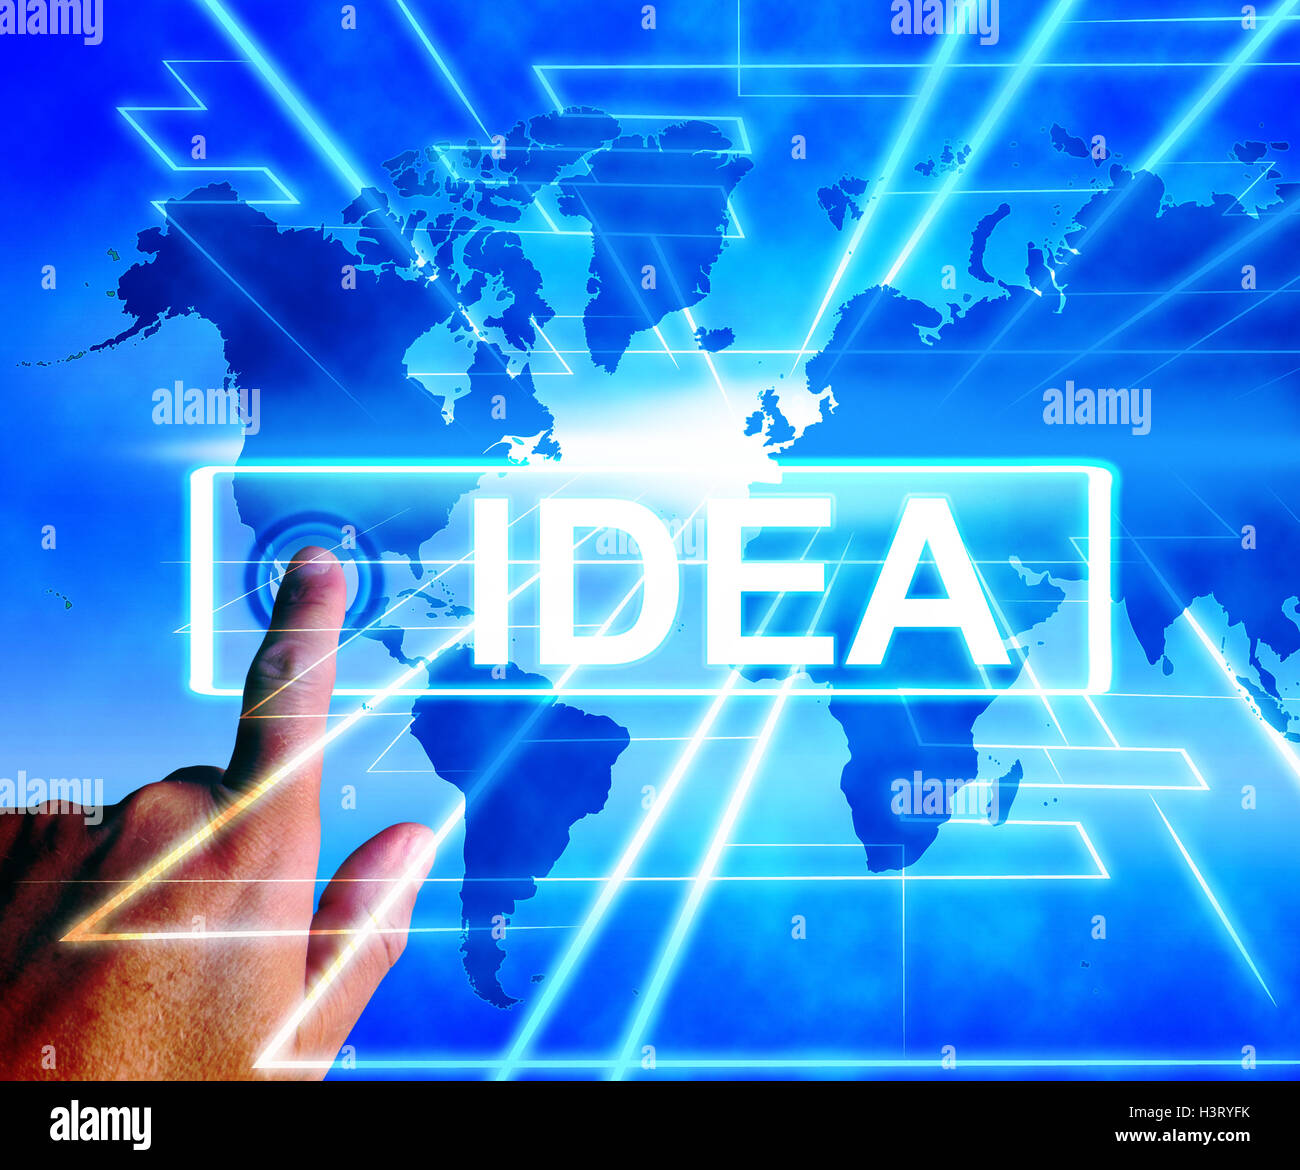 Idea Map Displays Worldwide Concepts Thoughts or Ideas Stock Photo